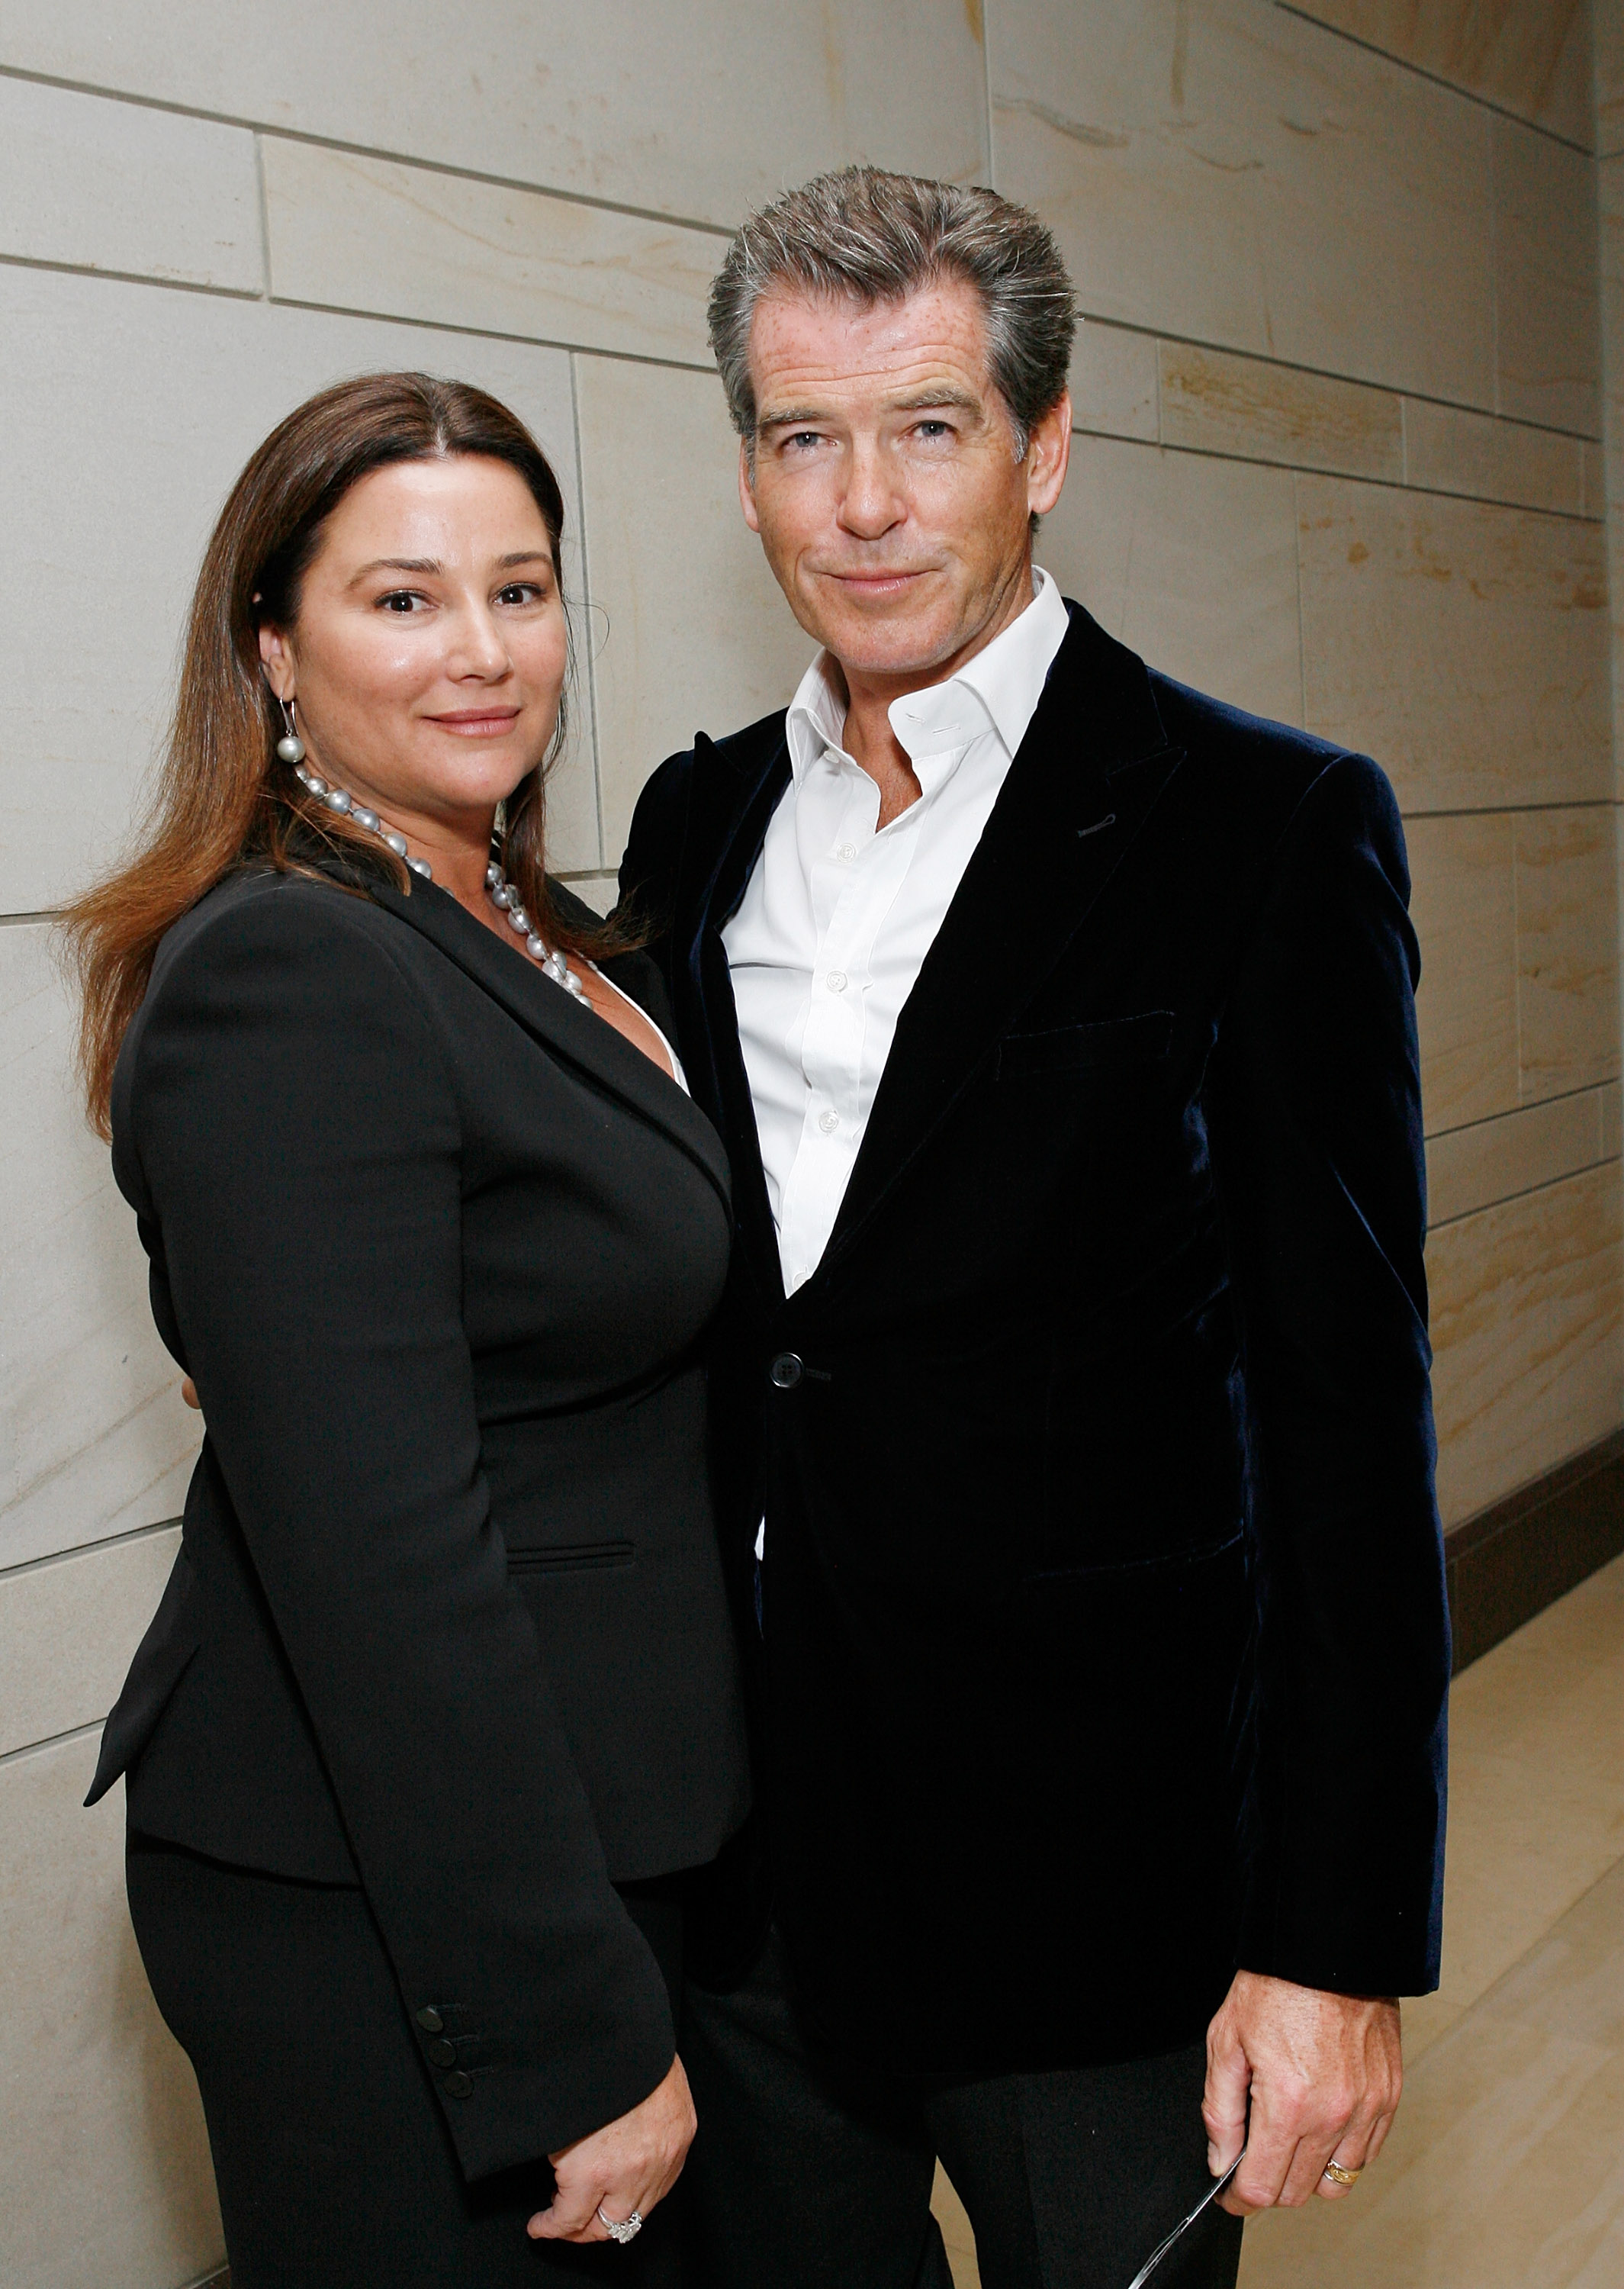 Honorary chairs Keely Brosnan and actor Pierce Brosnan attend the International Fund For Animal Welfare's Global Whale Conservation Congressional Reception at the U.S. Capital Visitor Center Atrium in Washington, D.C., on May 19, 2009. (Mark Von Holden—WireImage)